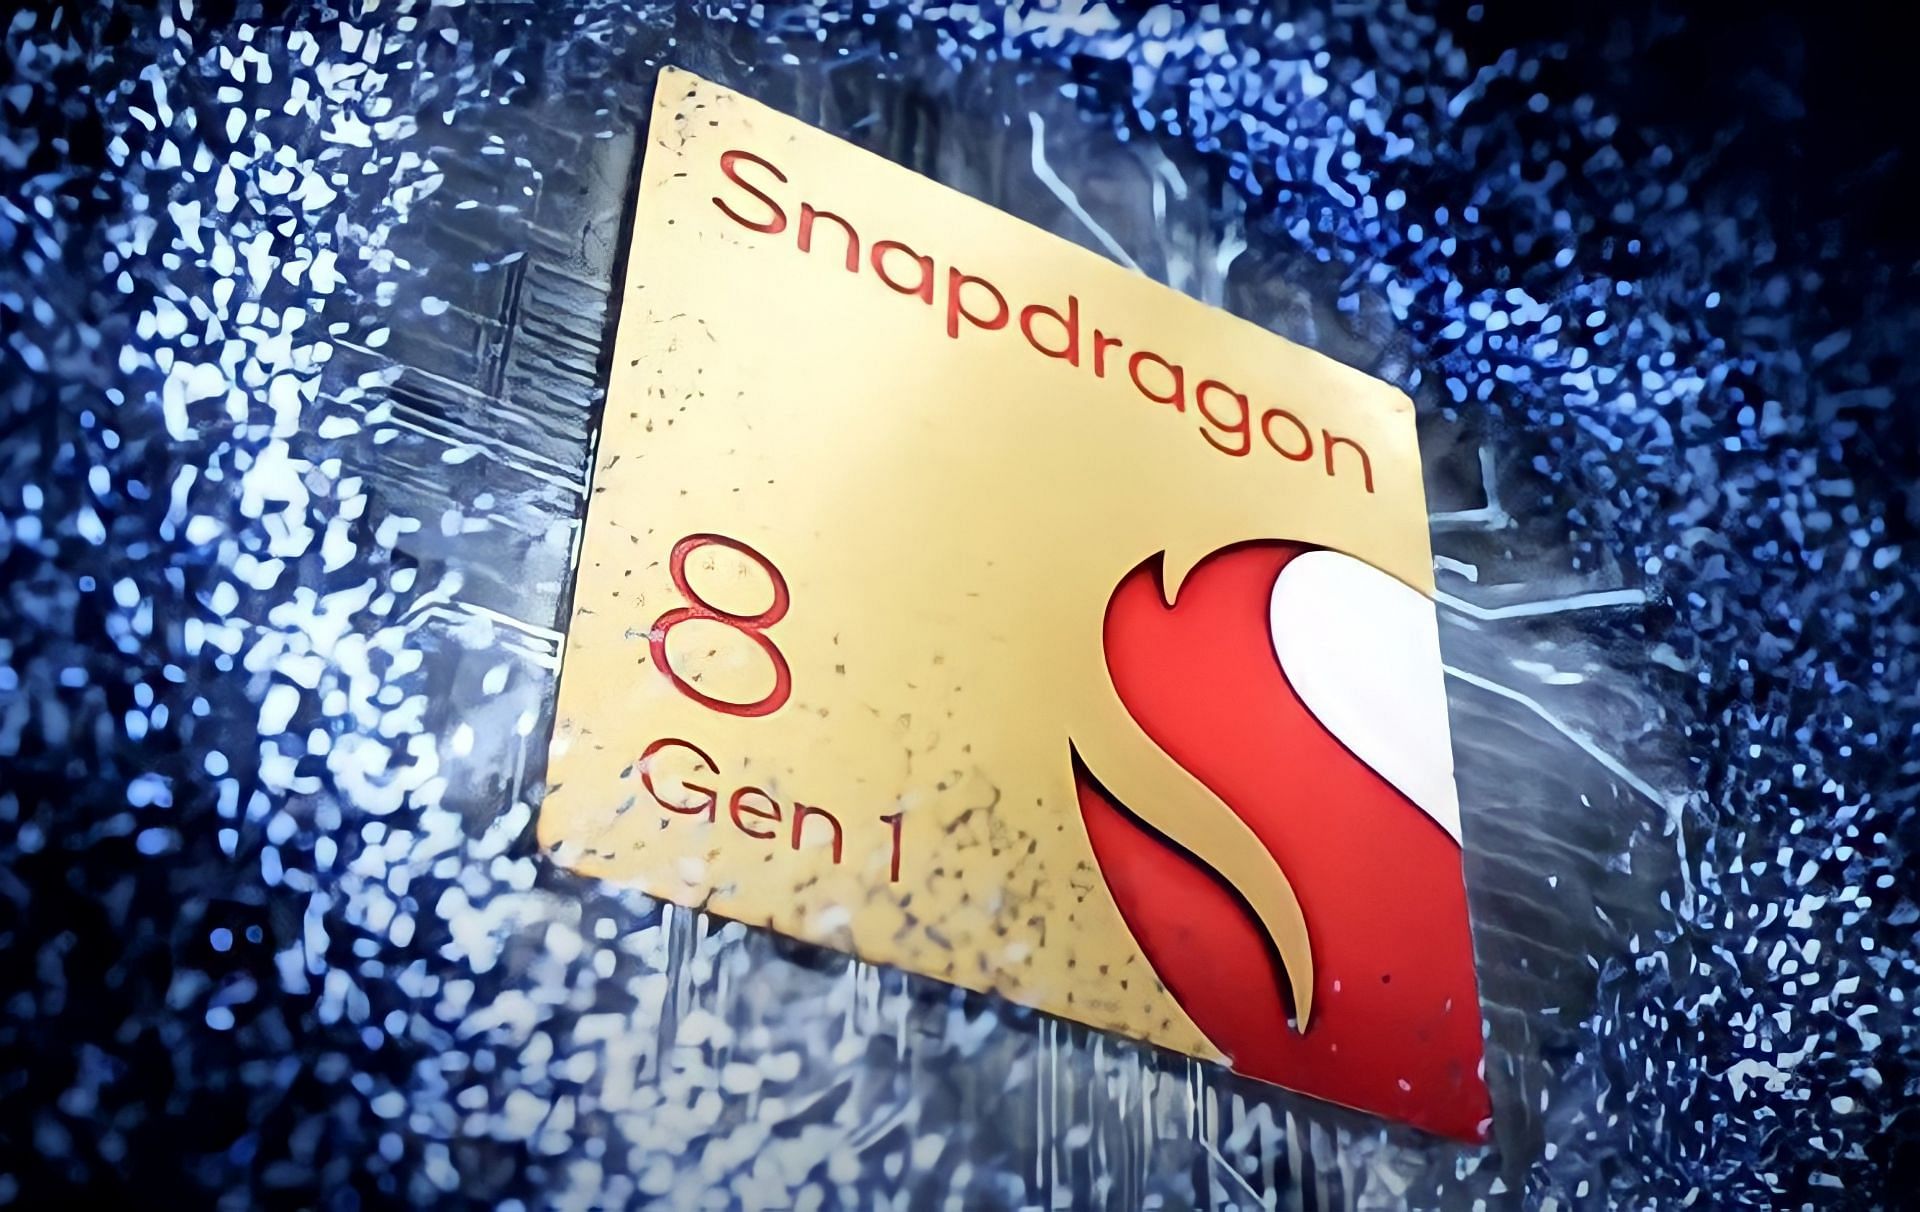 Snapdragon 8 Gen 1 is currently the best Snapdragon gaming processor in the market (Image via Qualcomm)